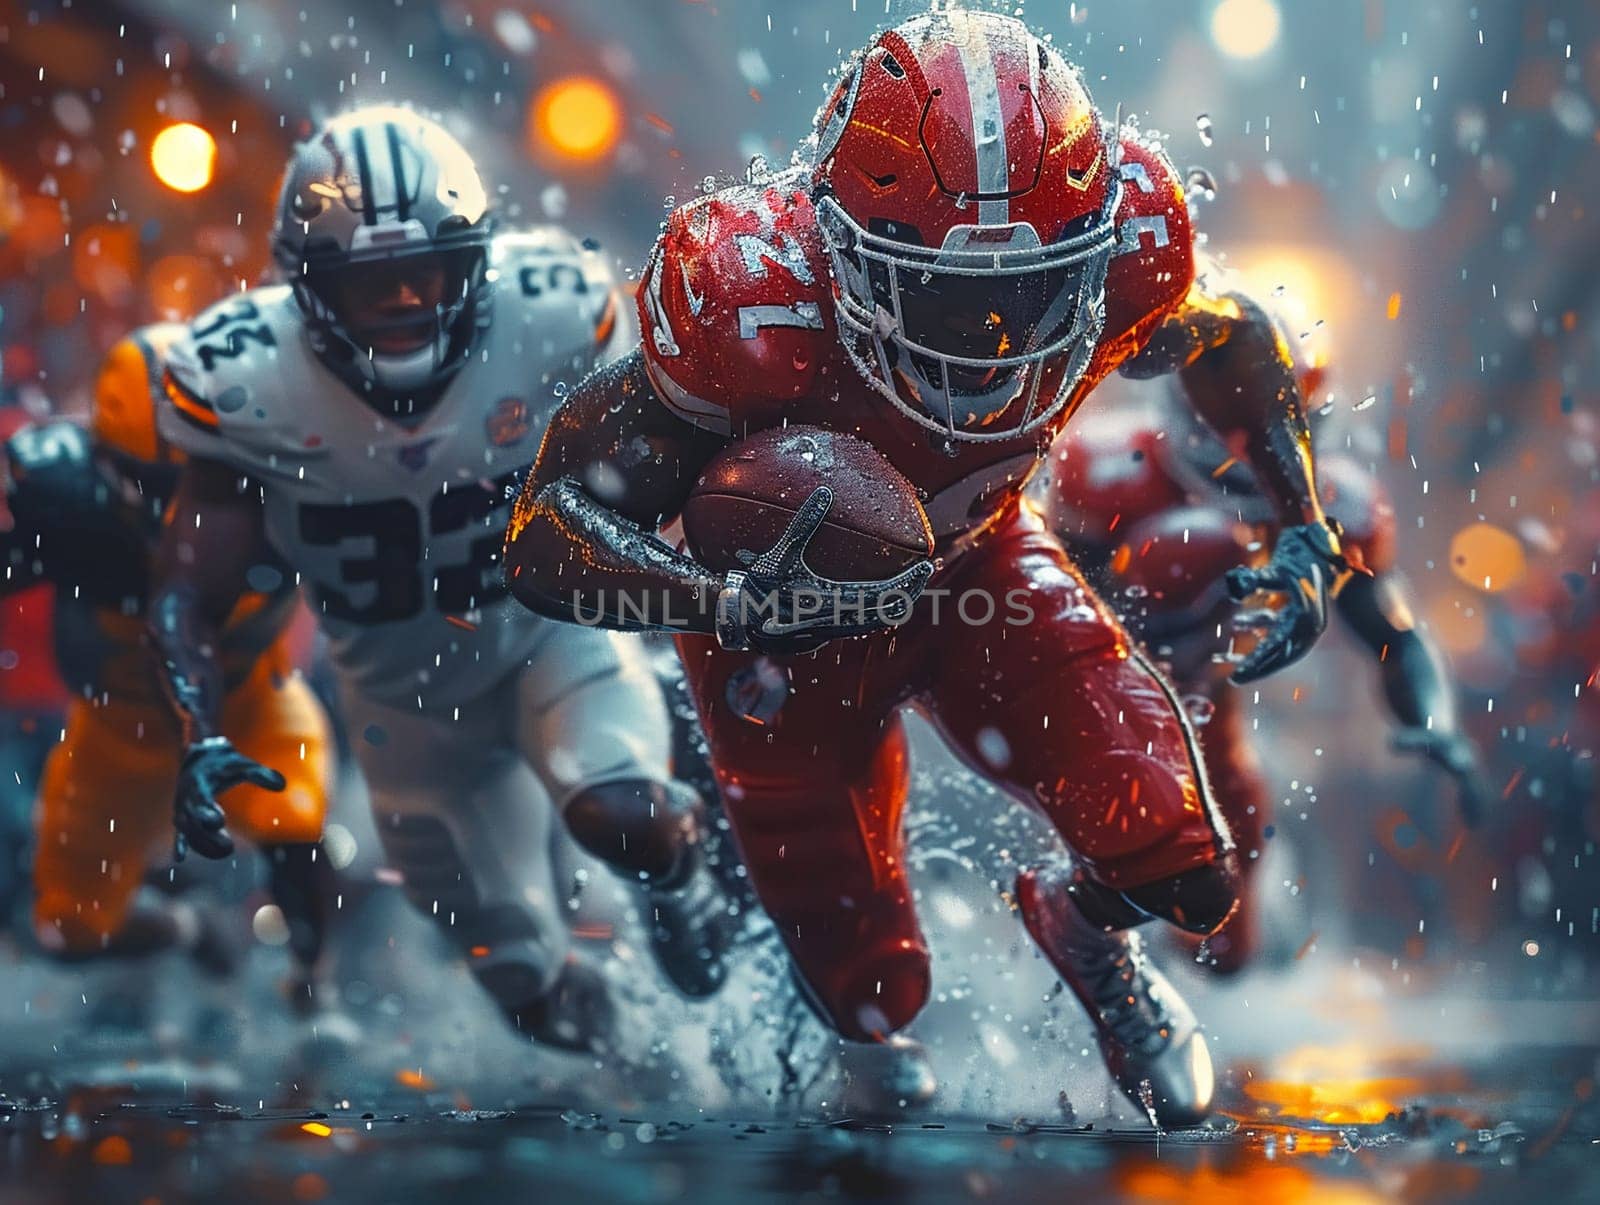 Sport event illustration in 3D style, capturing the intensity of athletes in motion with realistic detail.